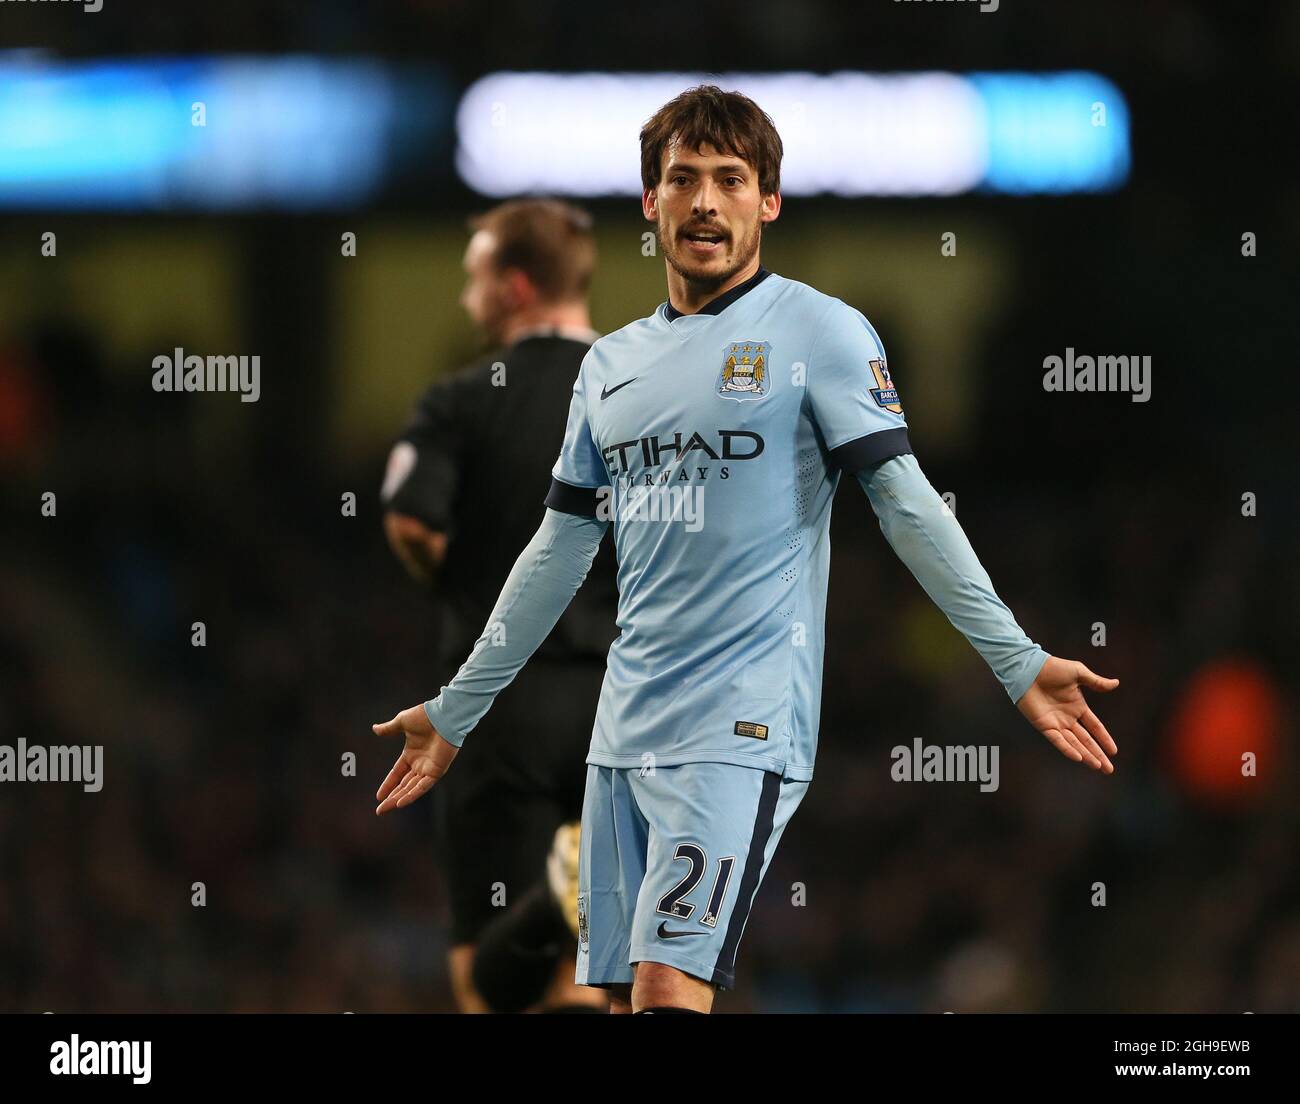 David Silva of Manchester City holds out his arms defence as Sergio Aguero of Manchester City questions his pass during the Barclays Premier League match between Manchester City and Leicester City at the Etihad Stadium, Manchester, England on 4th March 2015. Picture Simon Bellis. Stock Photo